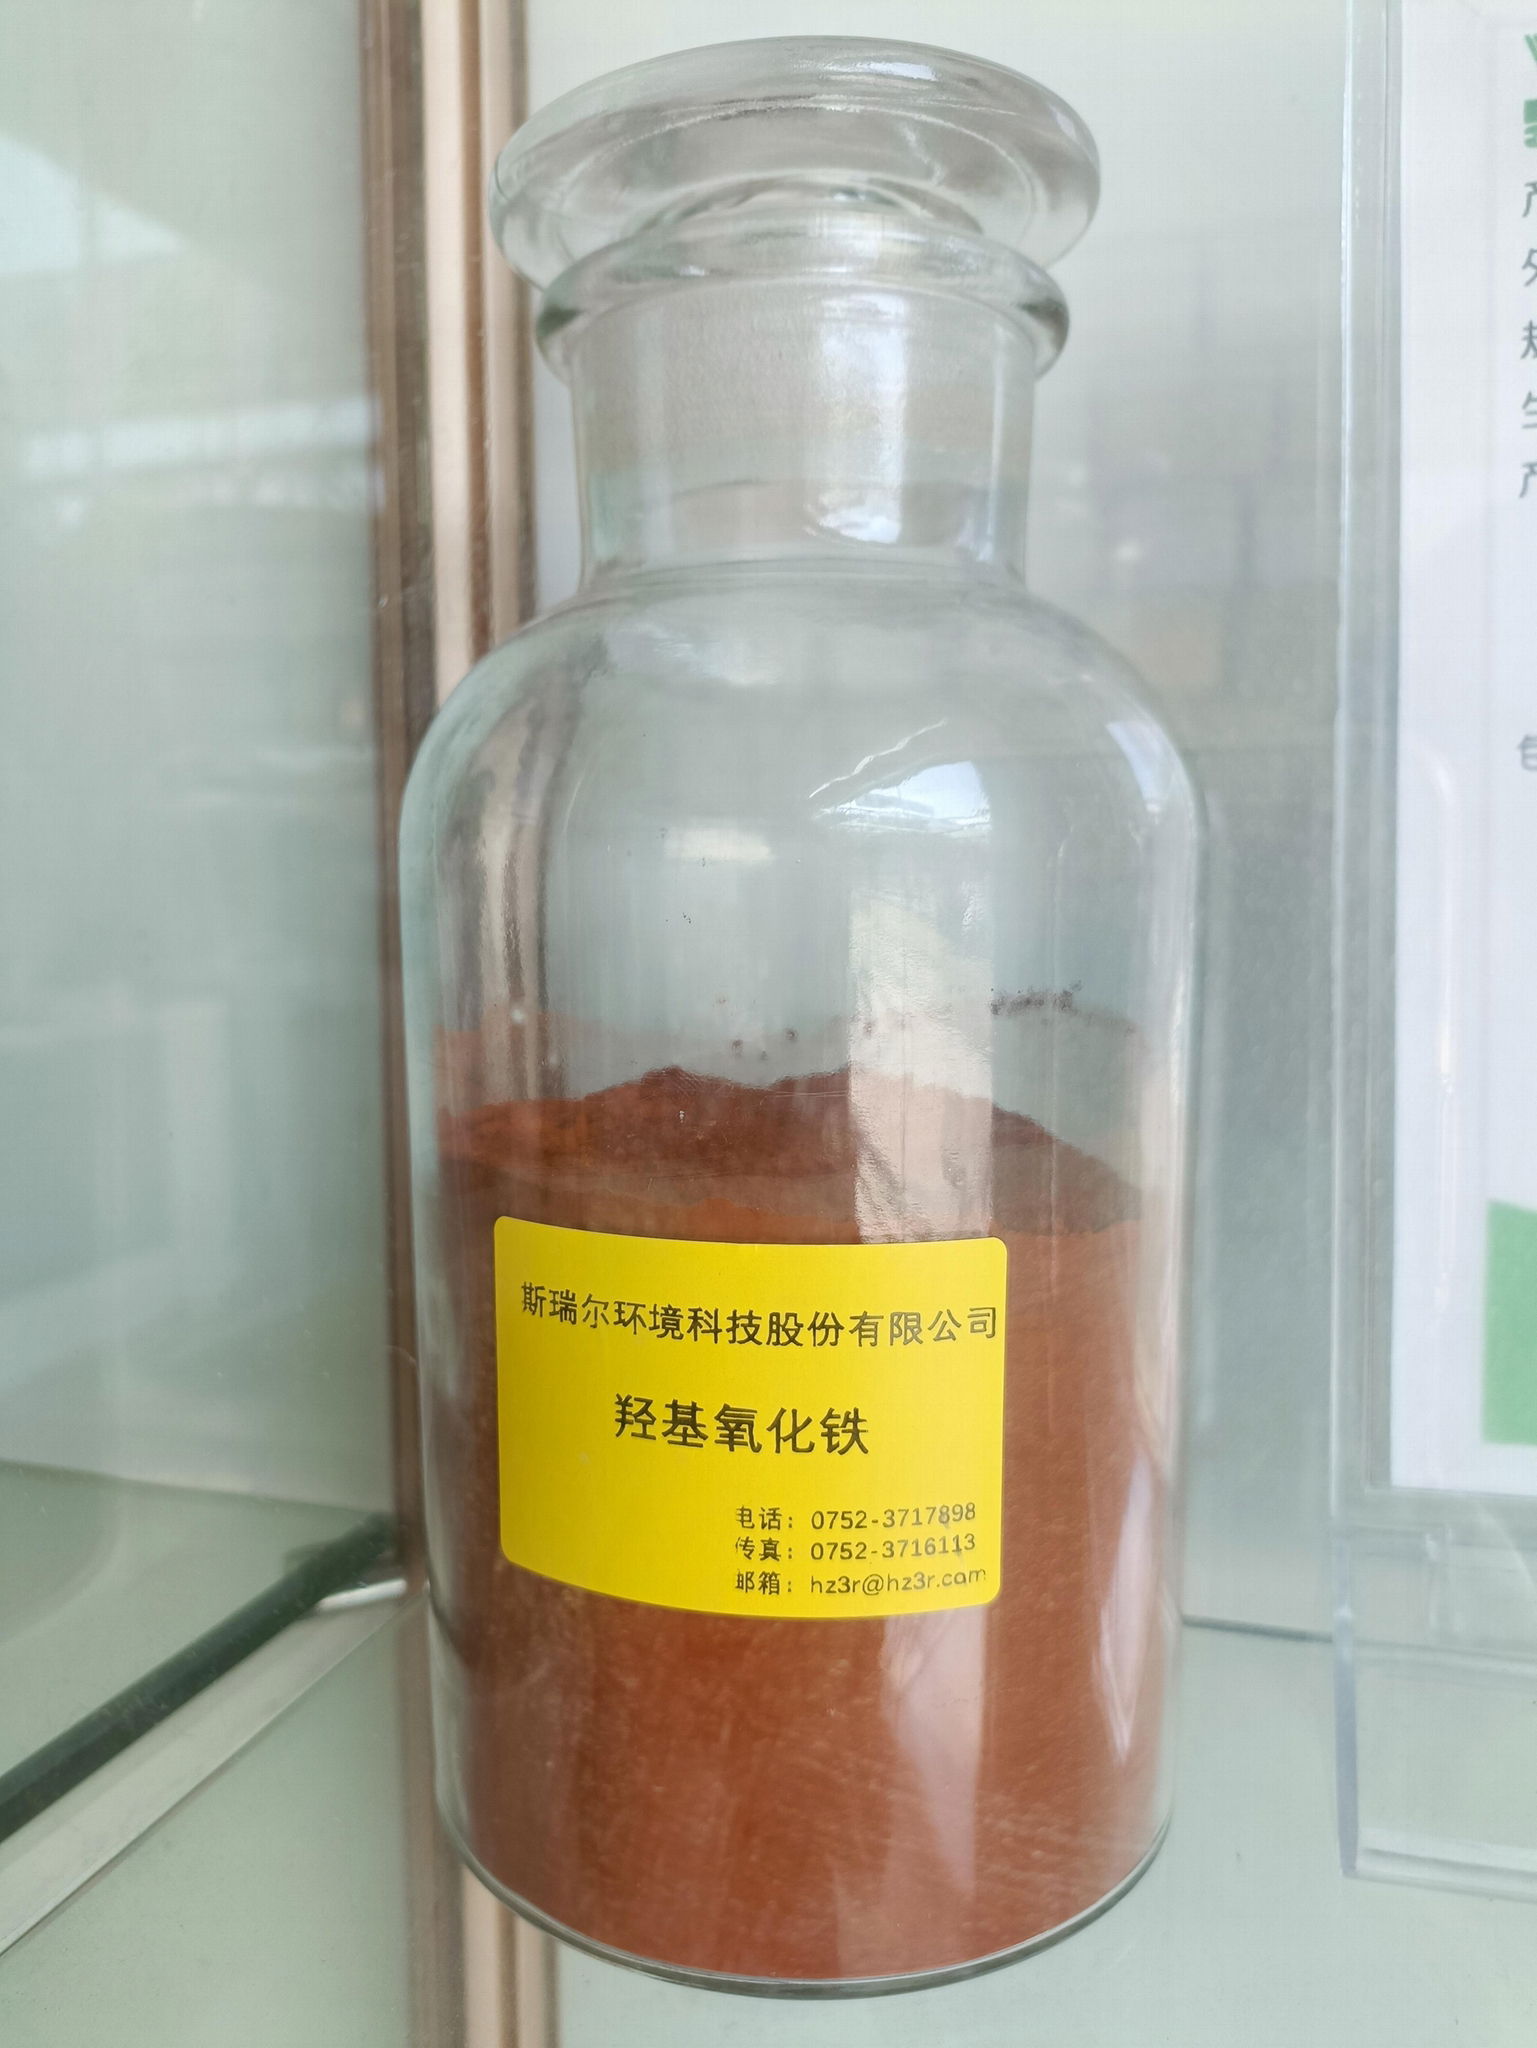 IRON OXYHYDROXIDE raw material for LiFePO4 Lithium iron phosphate batteries